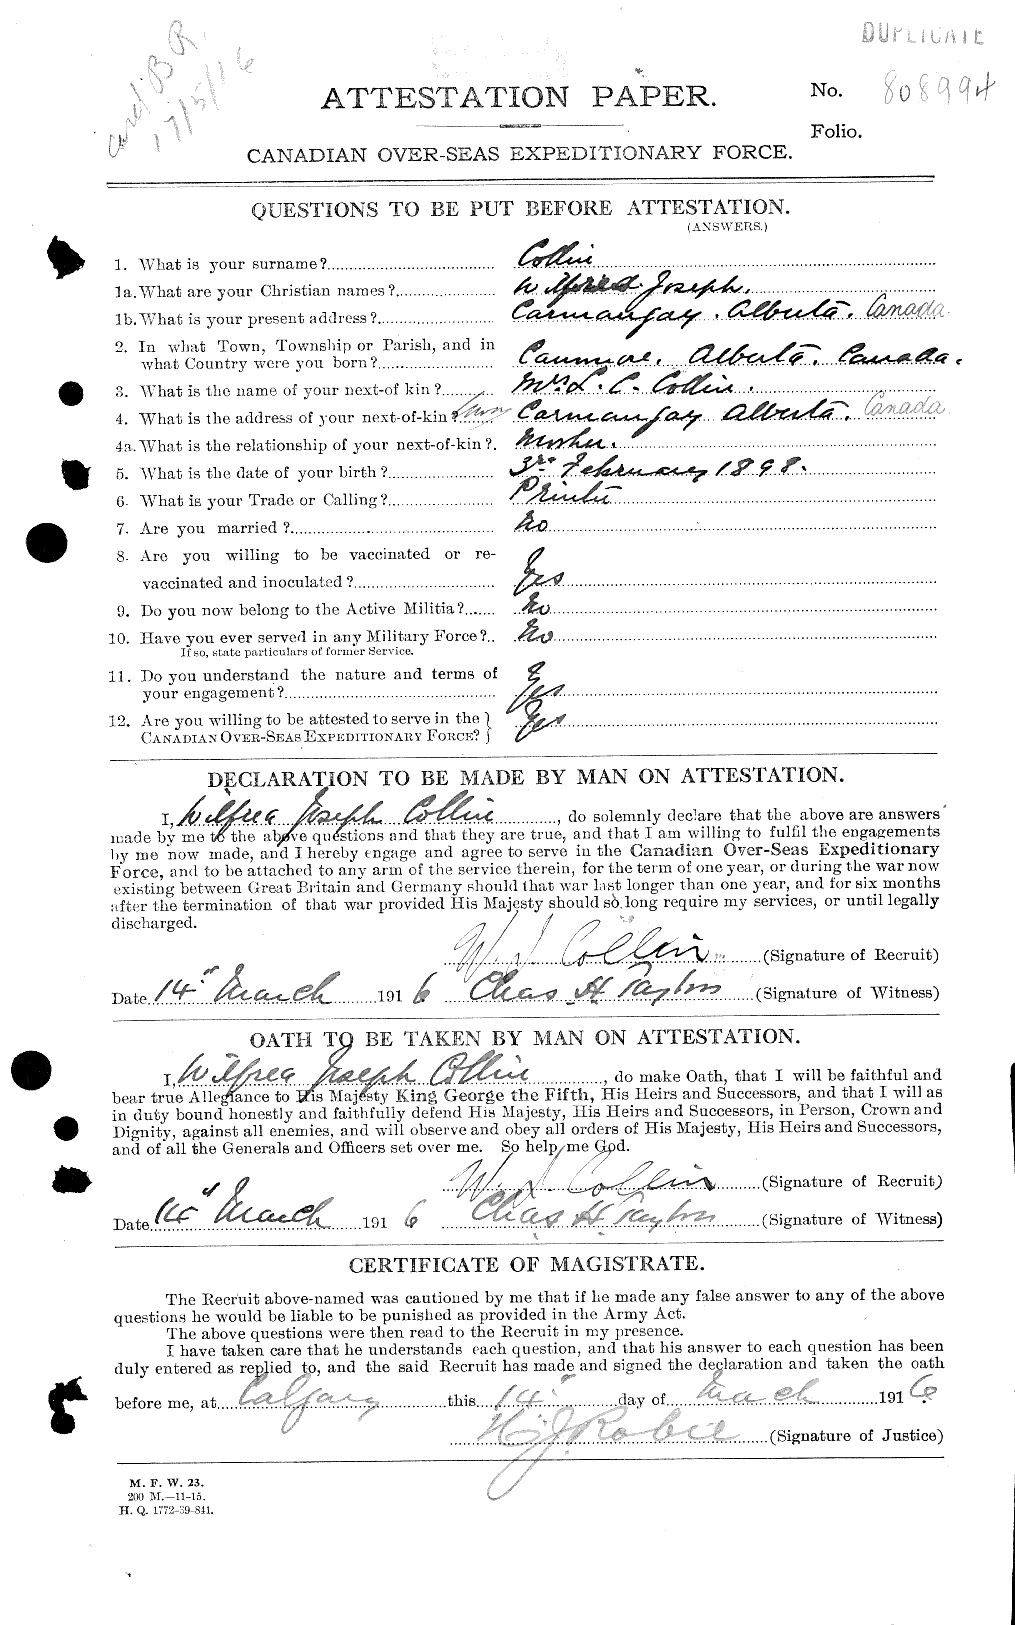 Personnel Records of the First World War - CEF 040704a